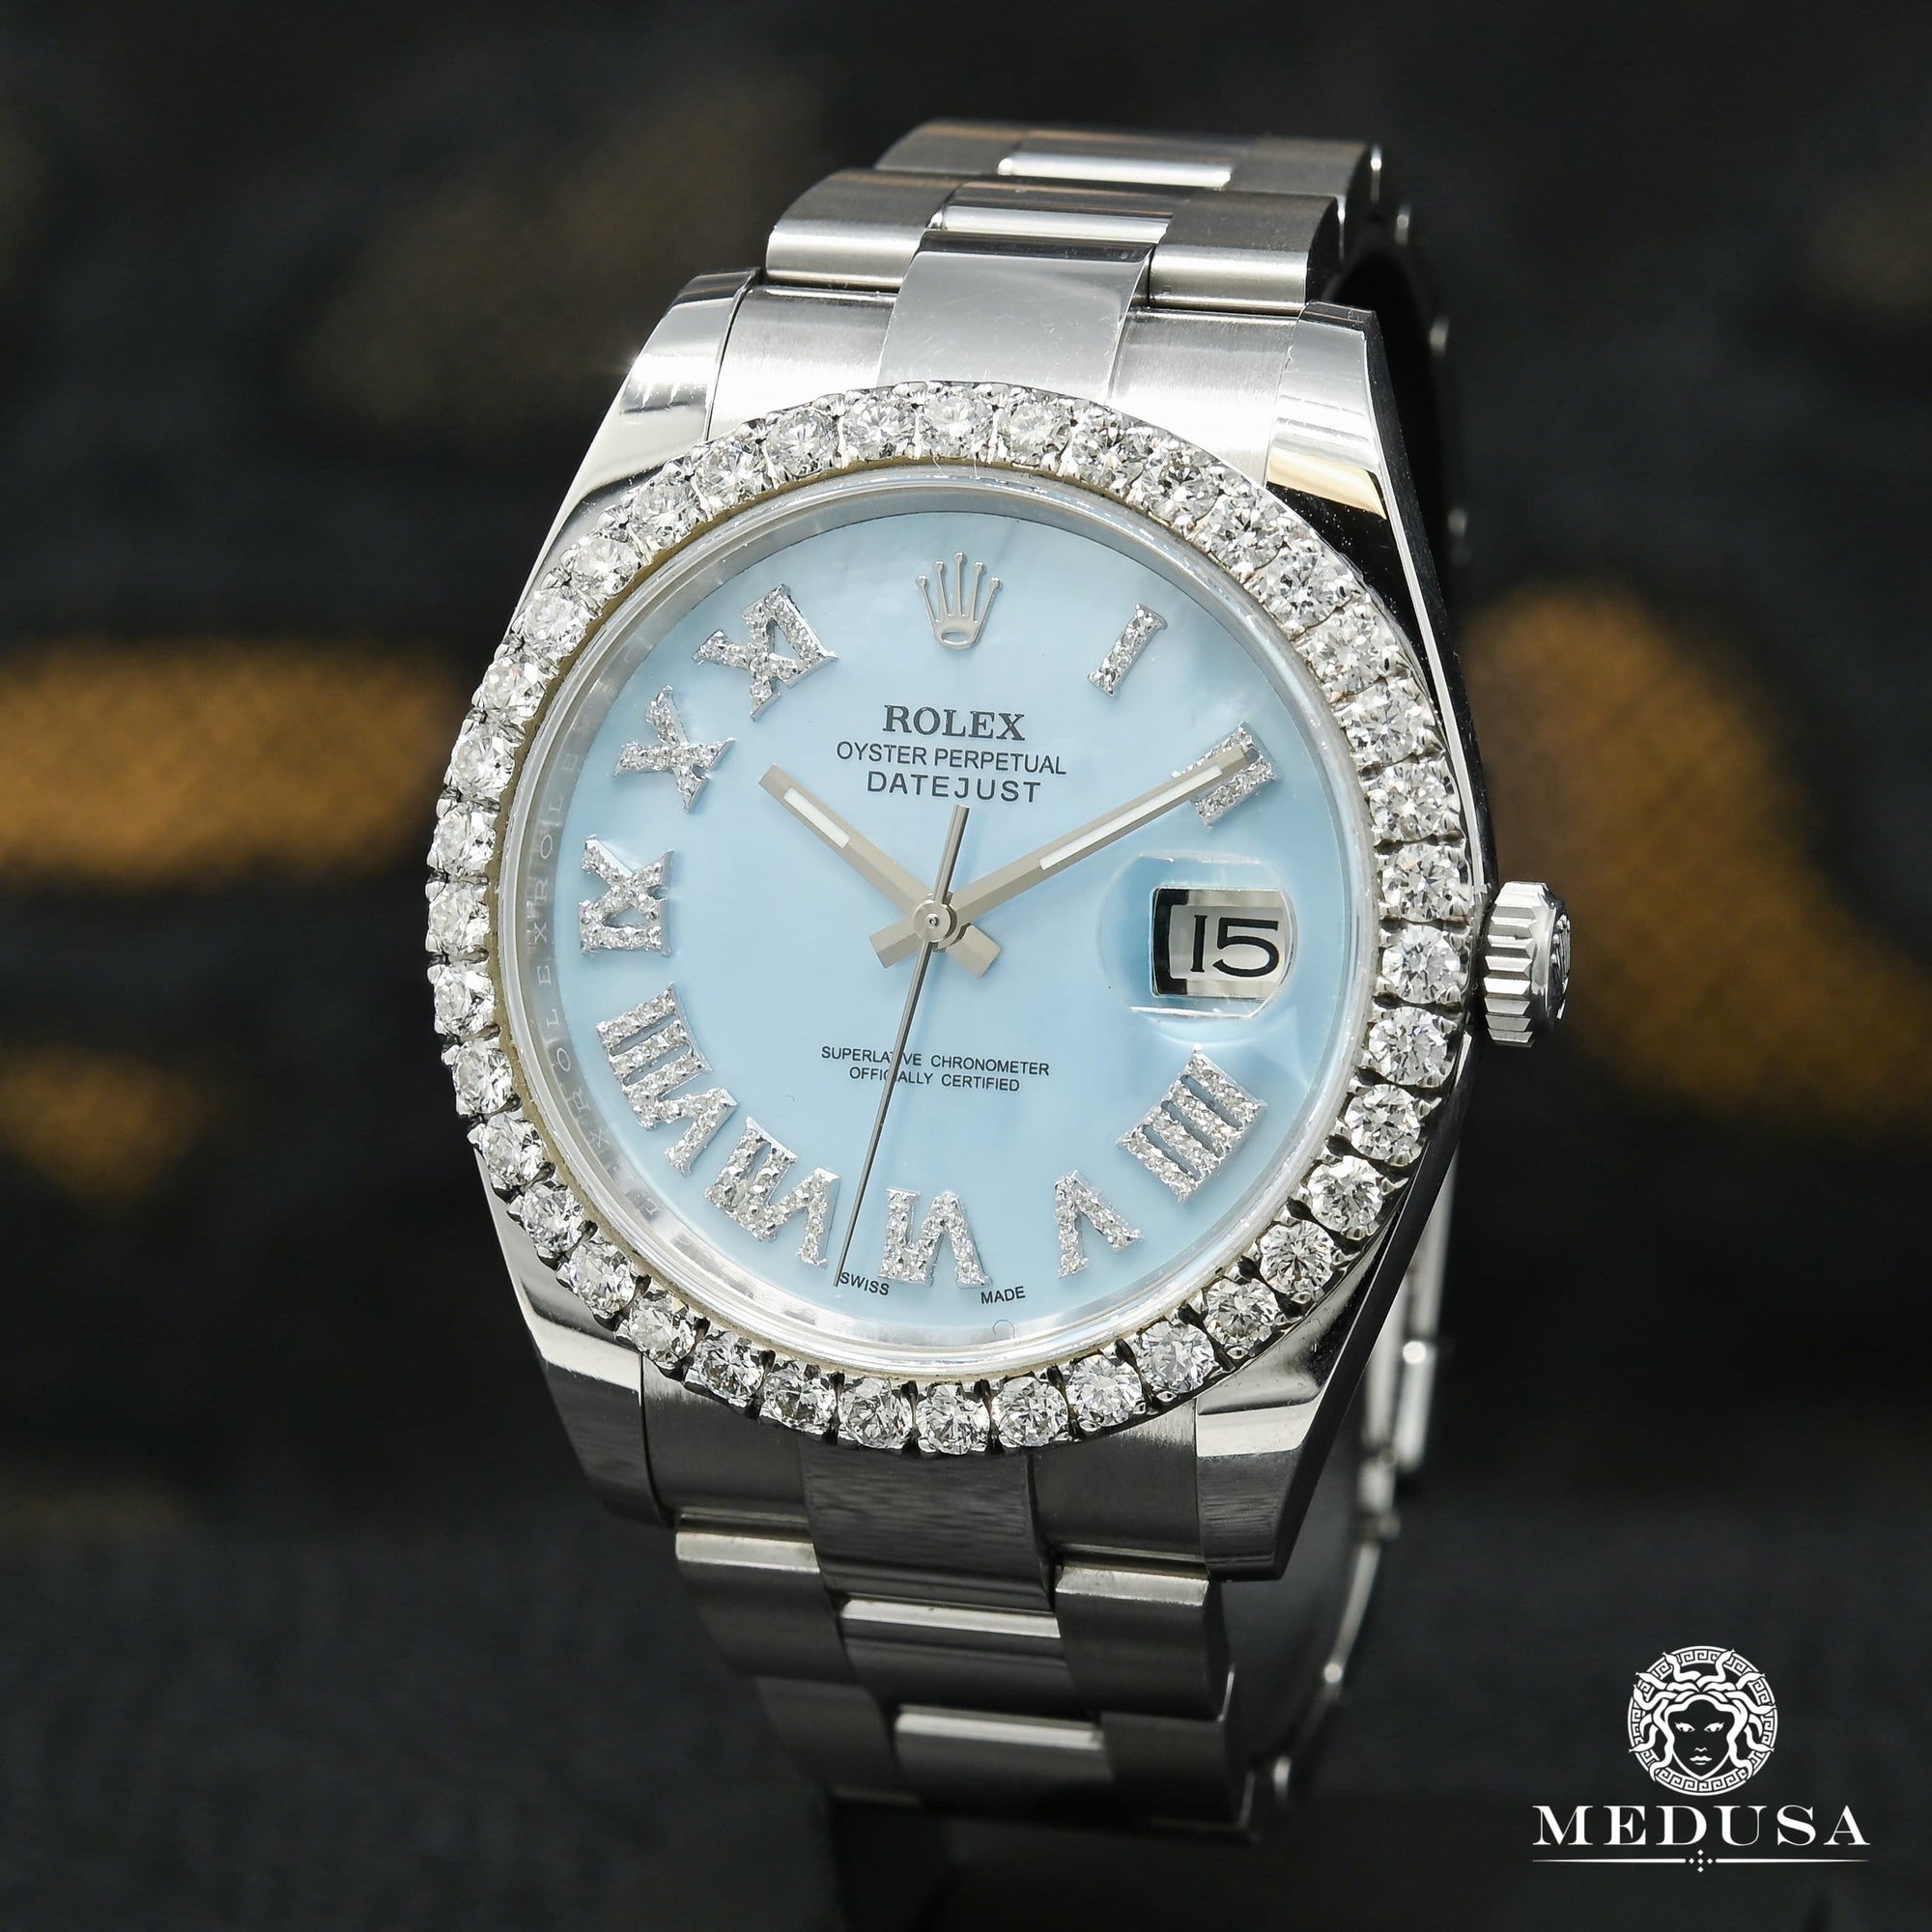 Rolex watch | Rolex Datejust 41mm Men's Watch - Cyan ''Mother of Pearl'' Stainless